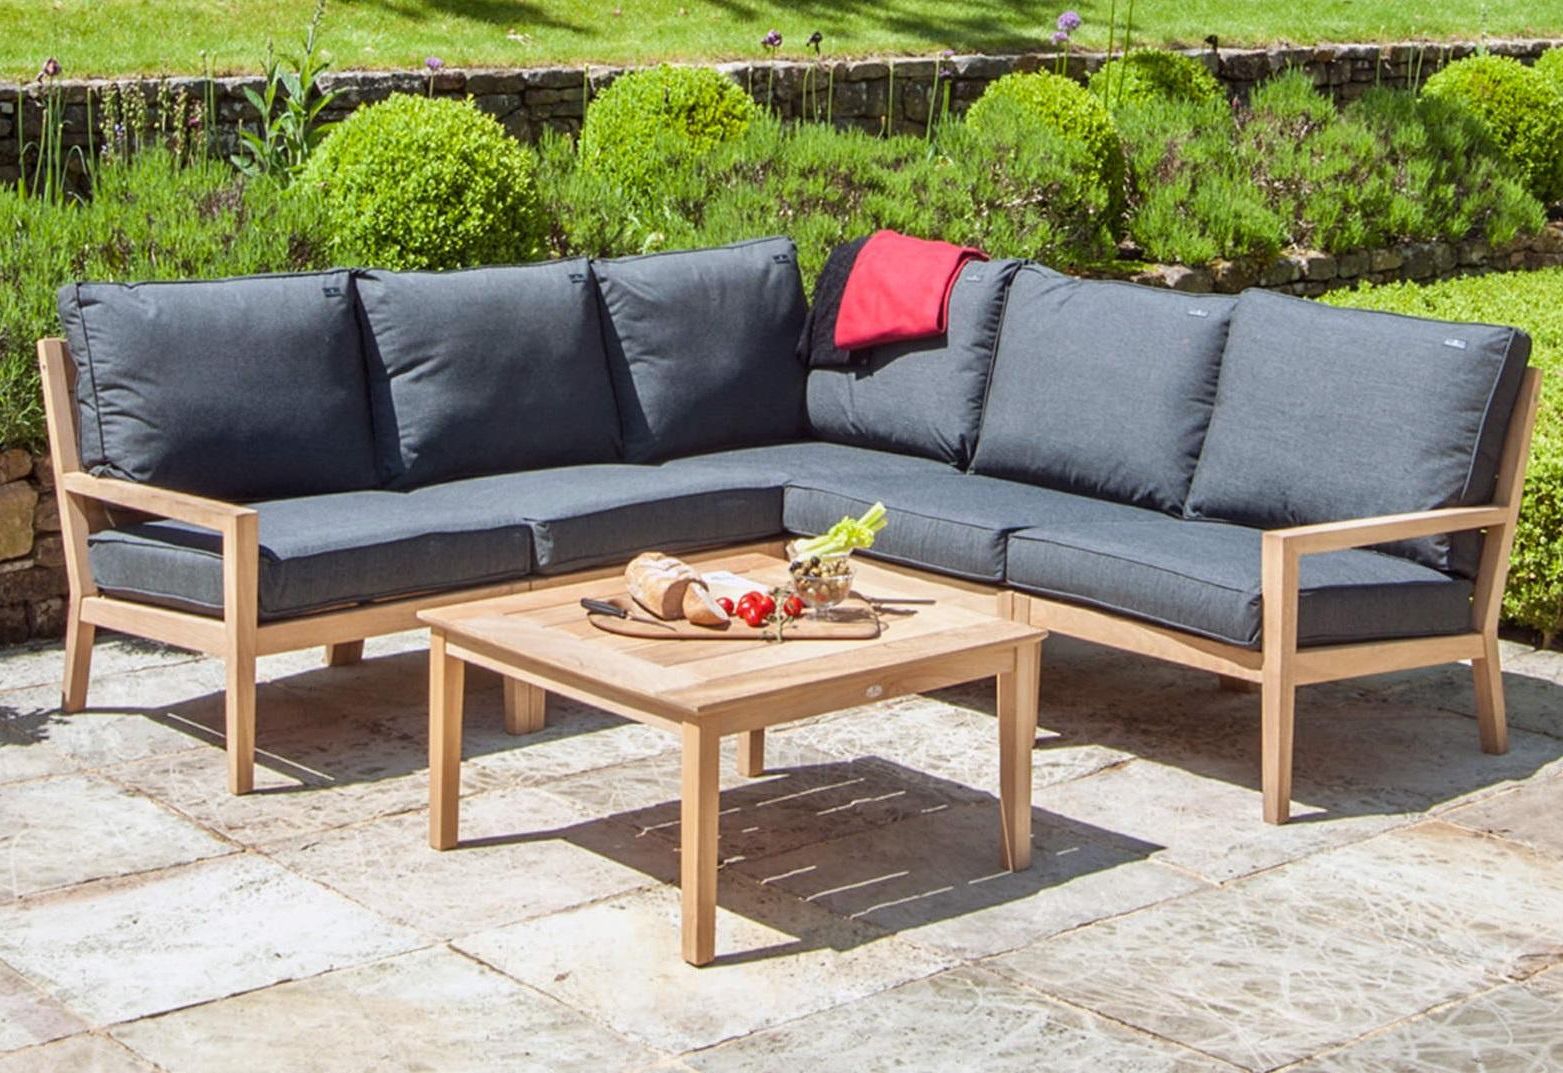 Well Liked Garden Lounge Corner Sofa Set In Roble Hardwood With Grey Cushions Throughout Wood Sofa Cushioned Outdoor Garden (View 11 of 15)